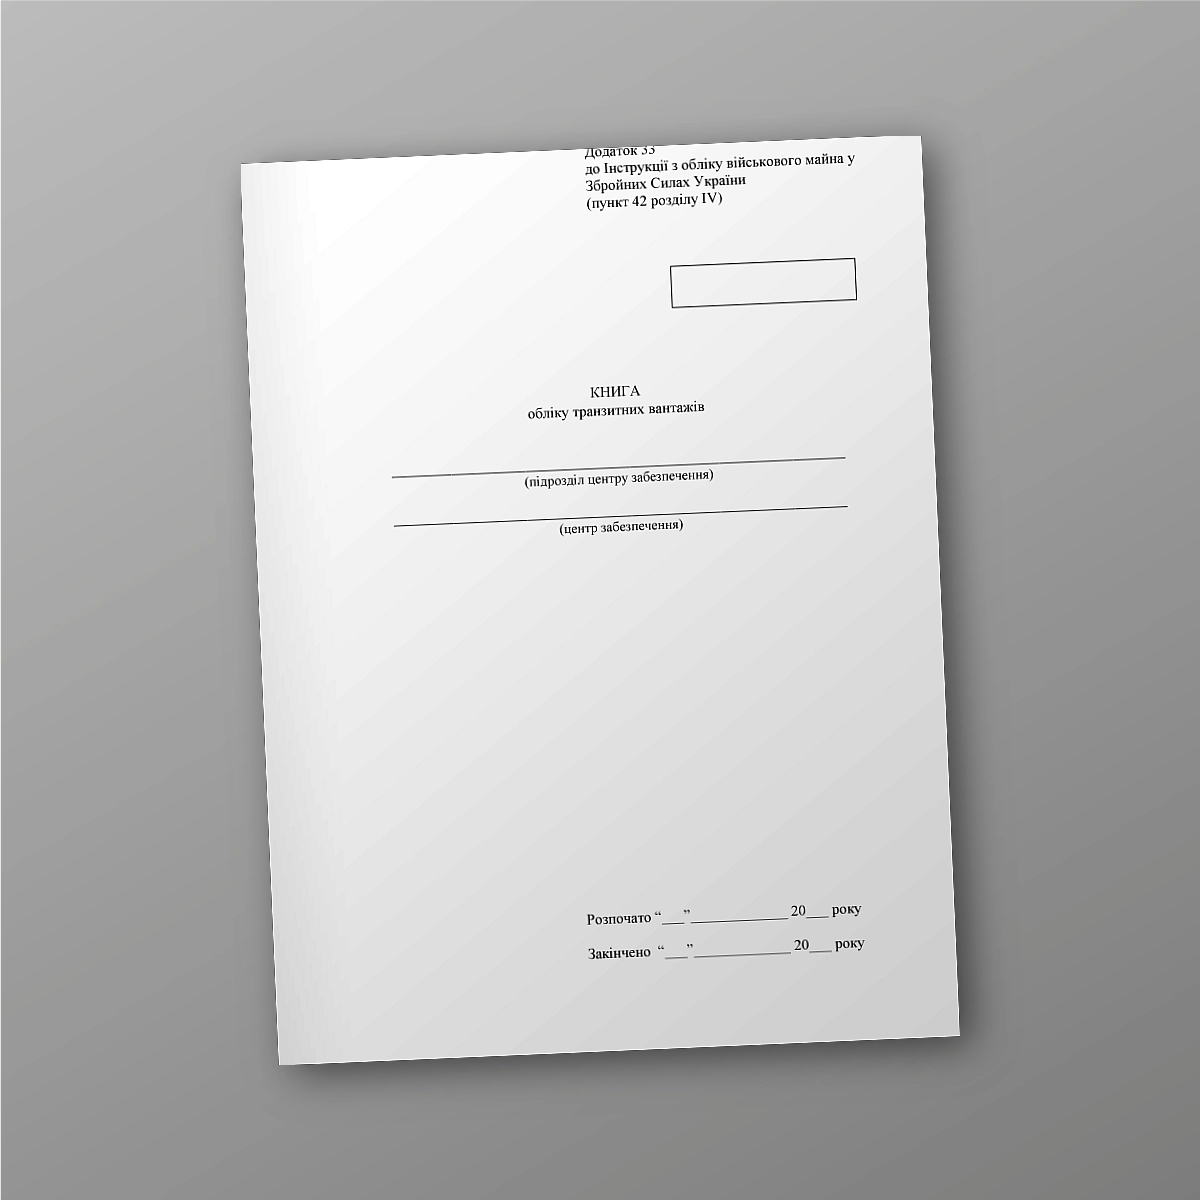 Transit cargo accounting book | PrintTo: